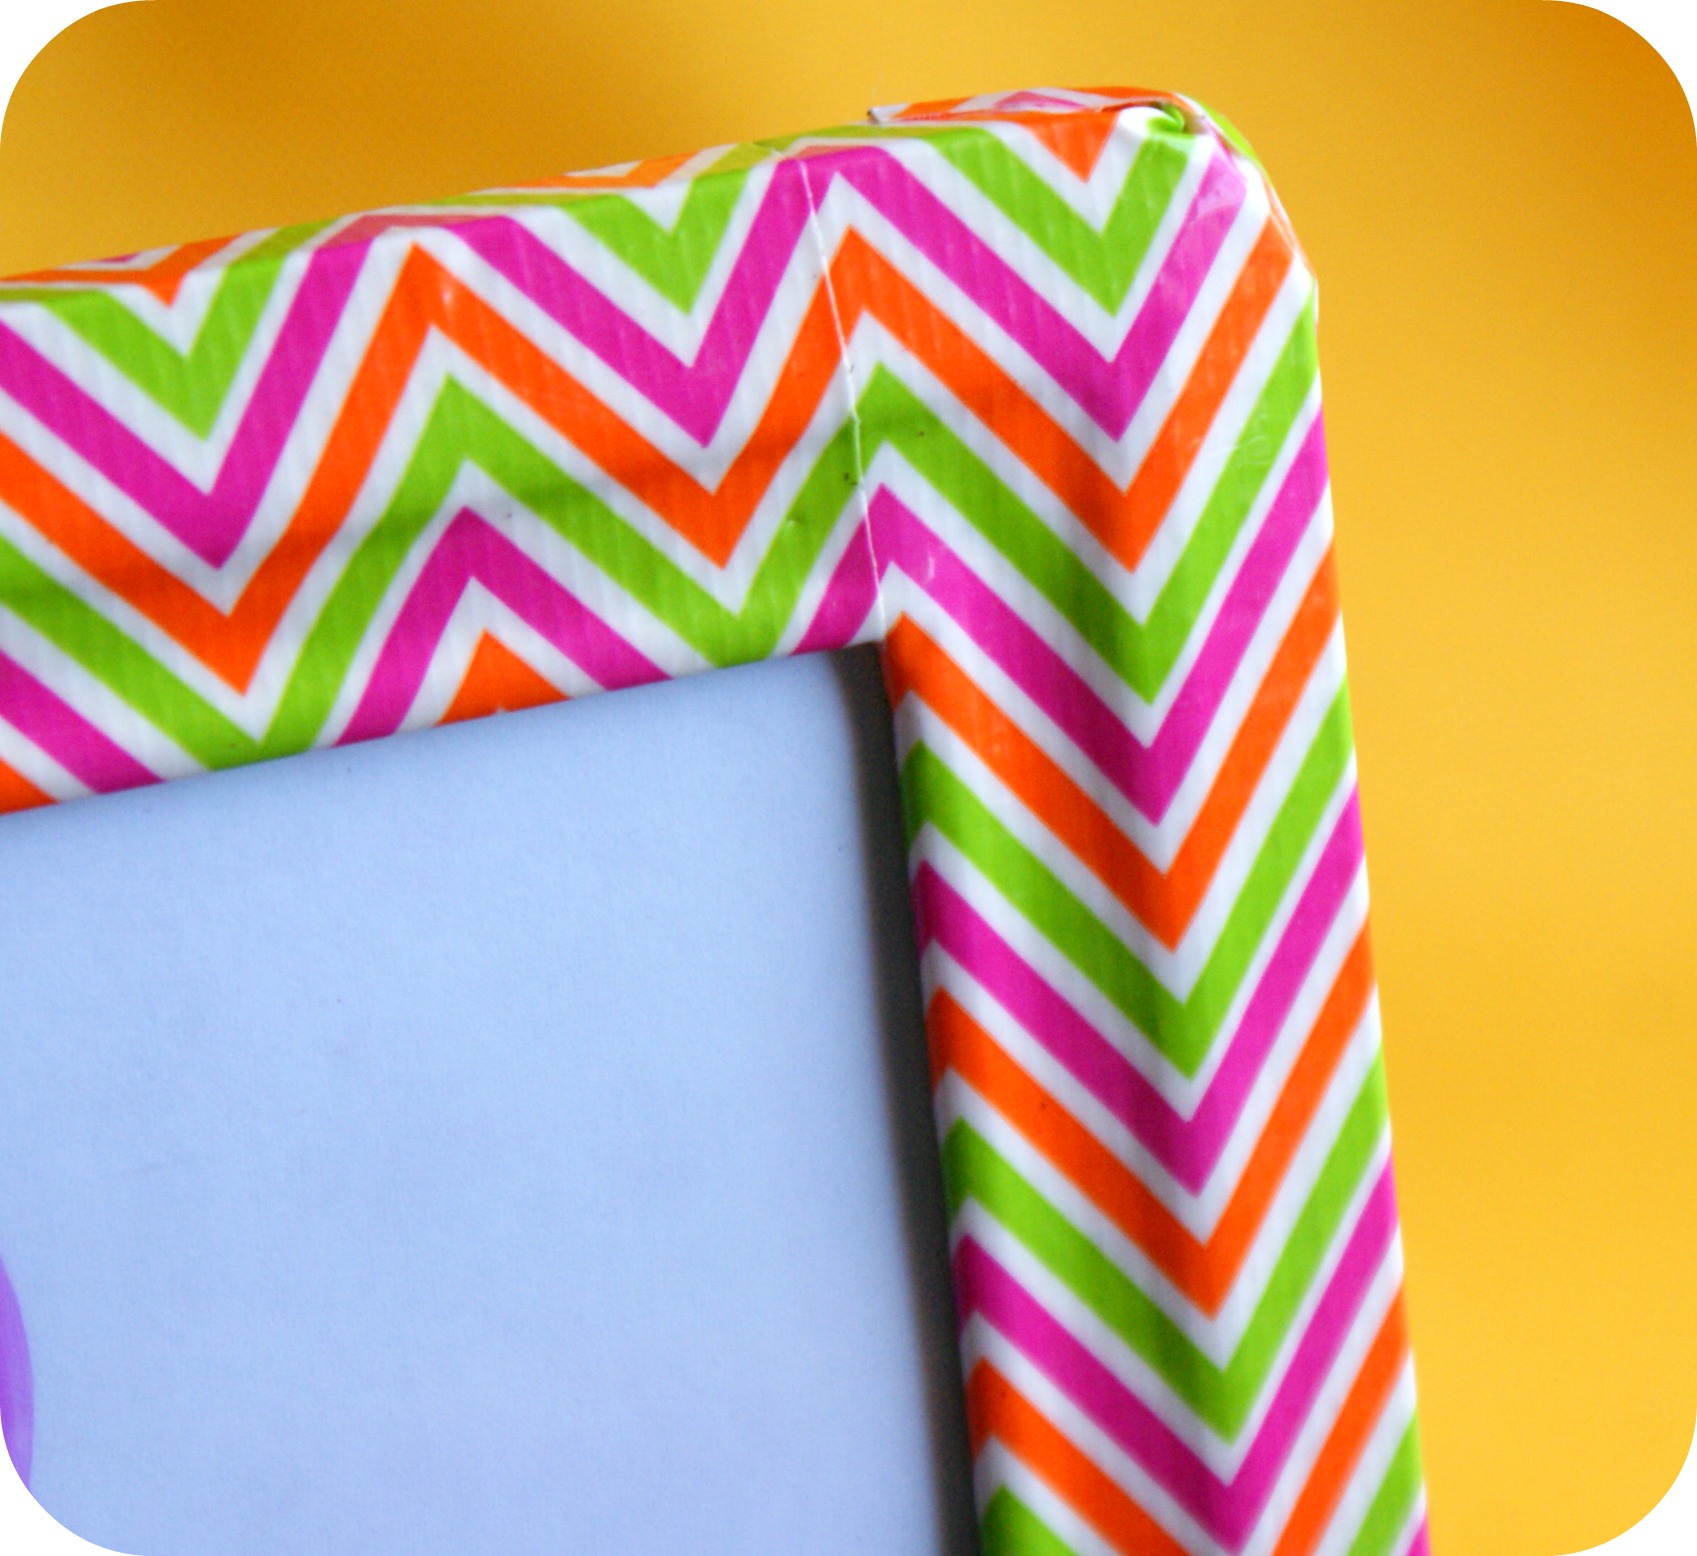 Duct Tape Picture Frame!